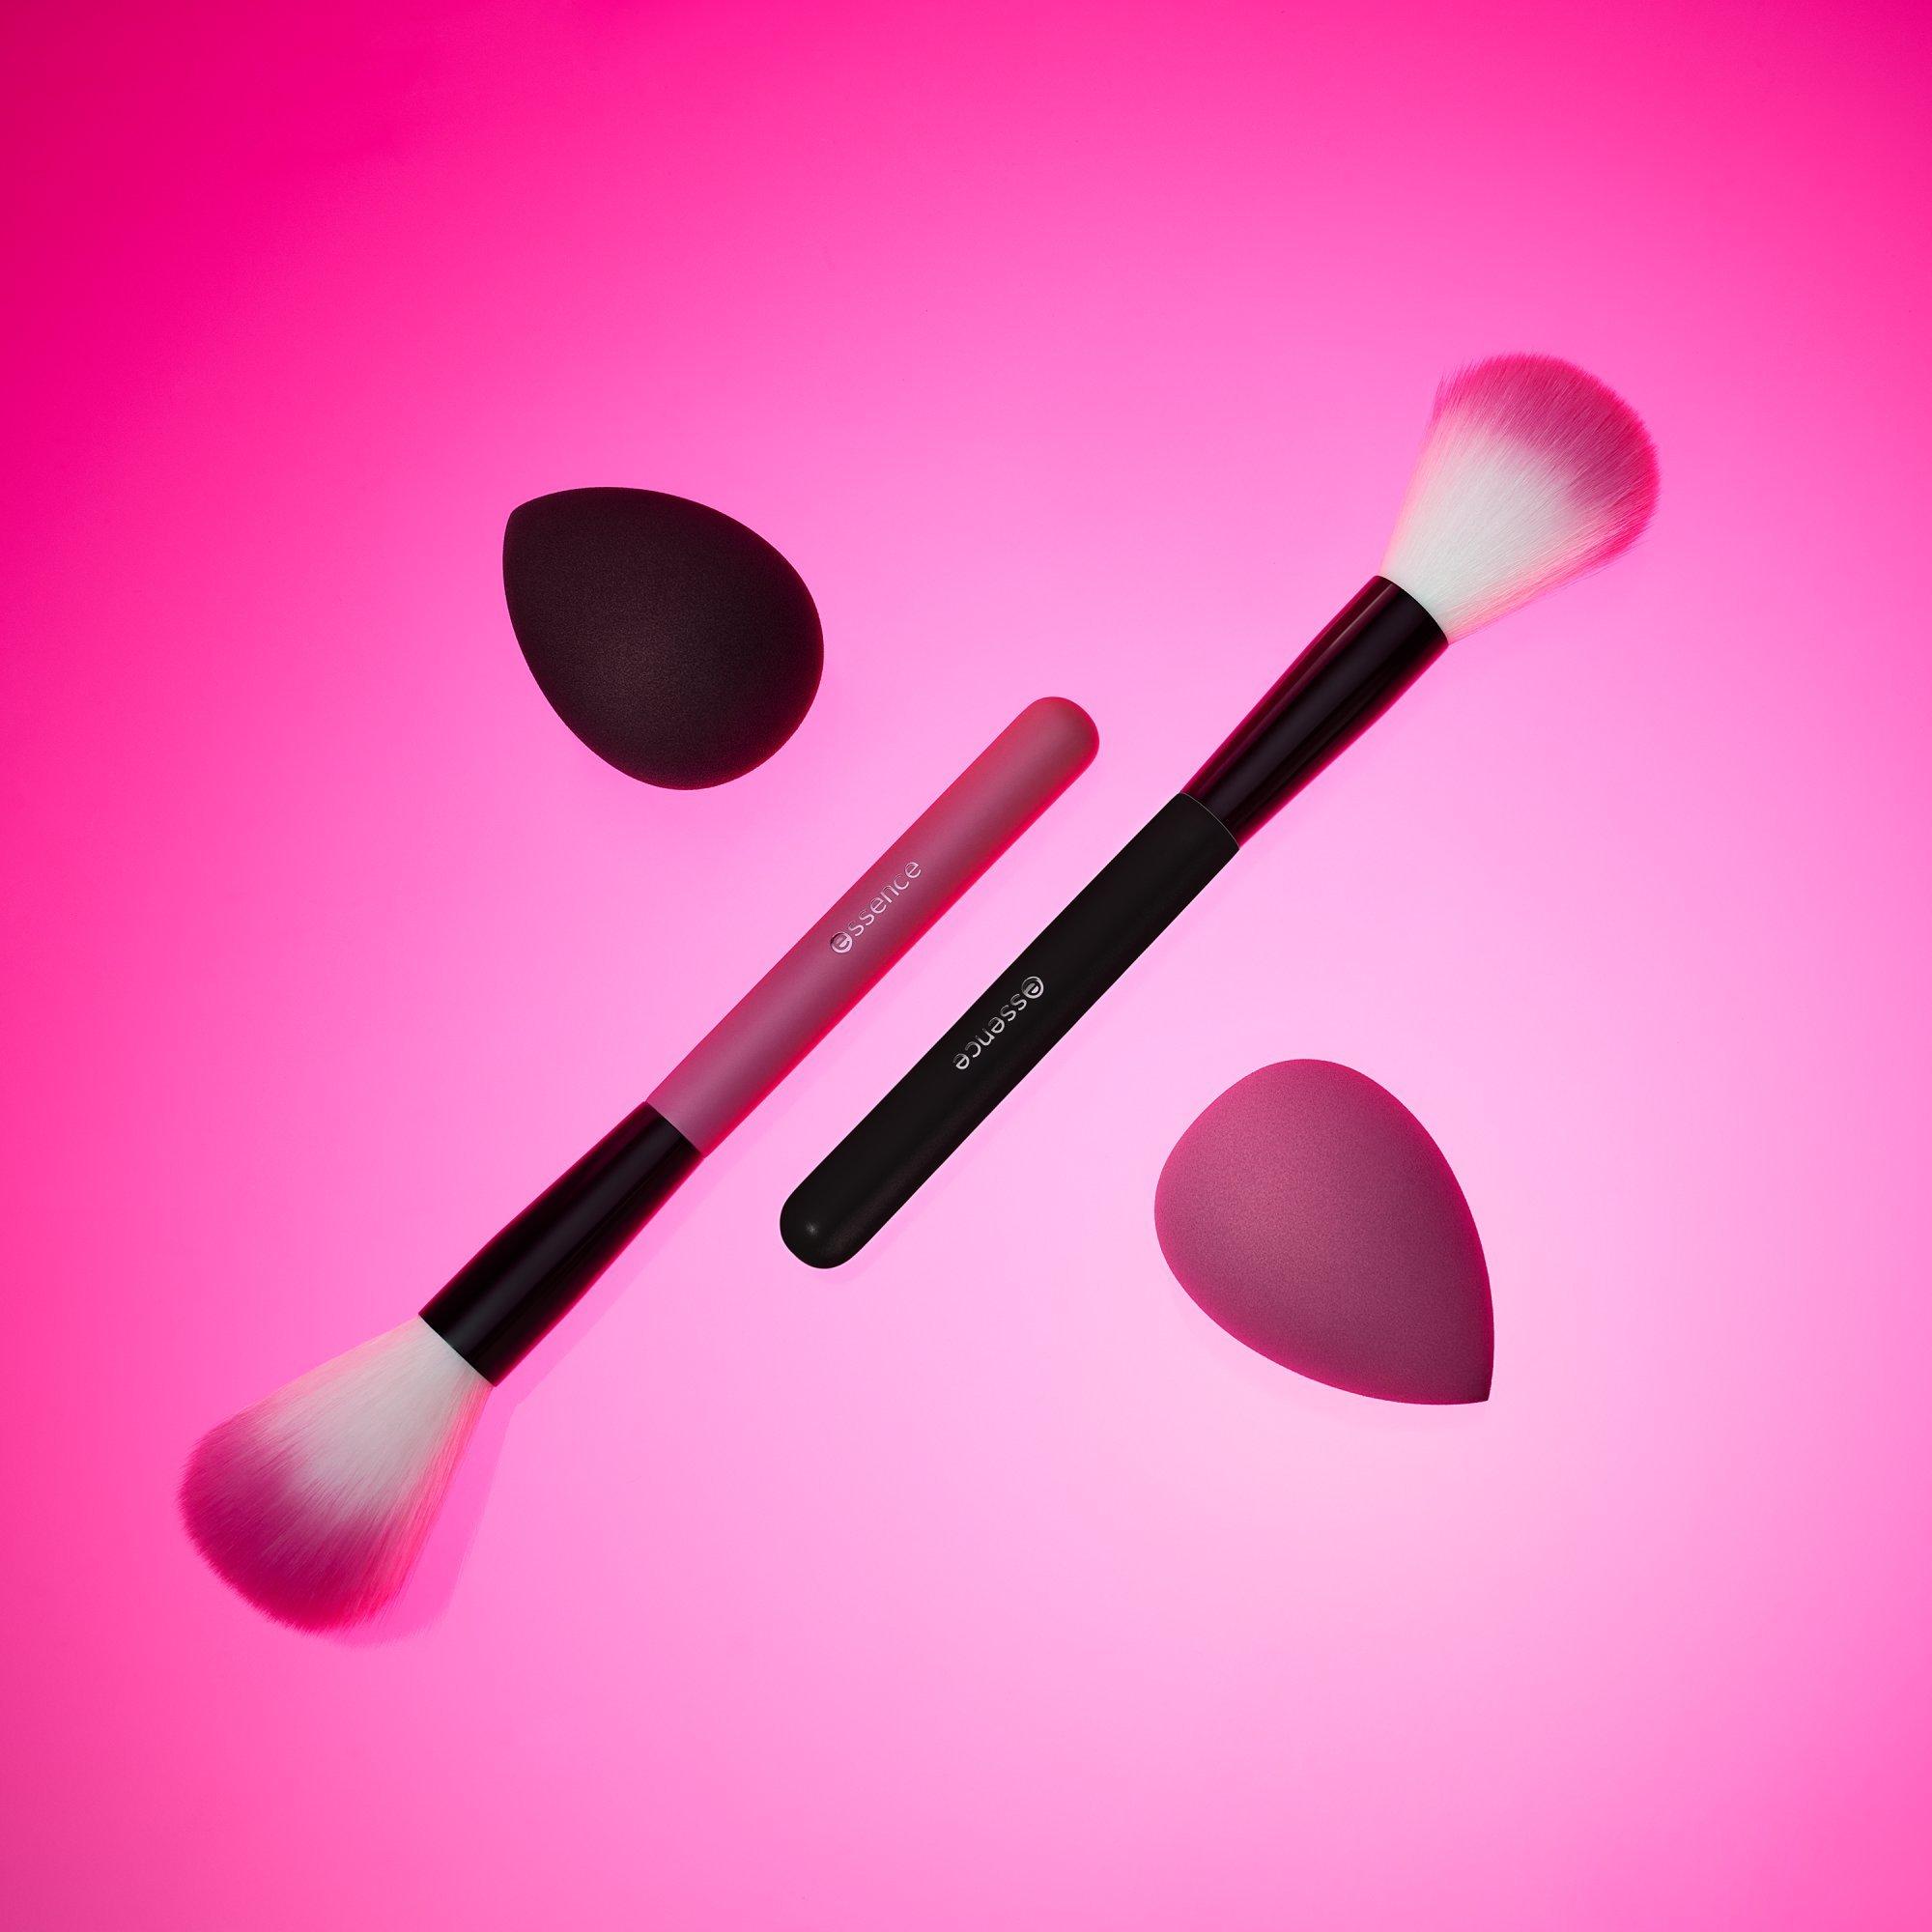 PINK is the new BLACK colour-changing makeup sponge